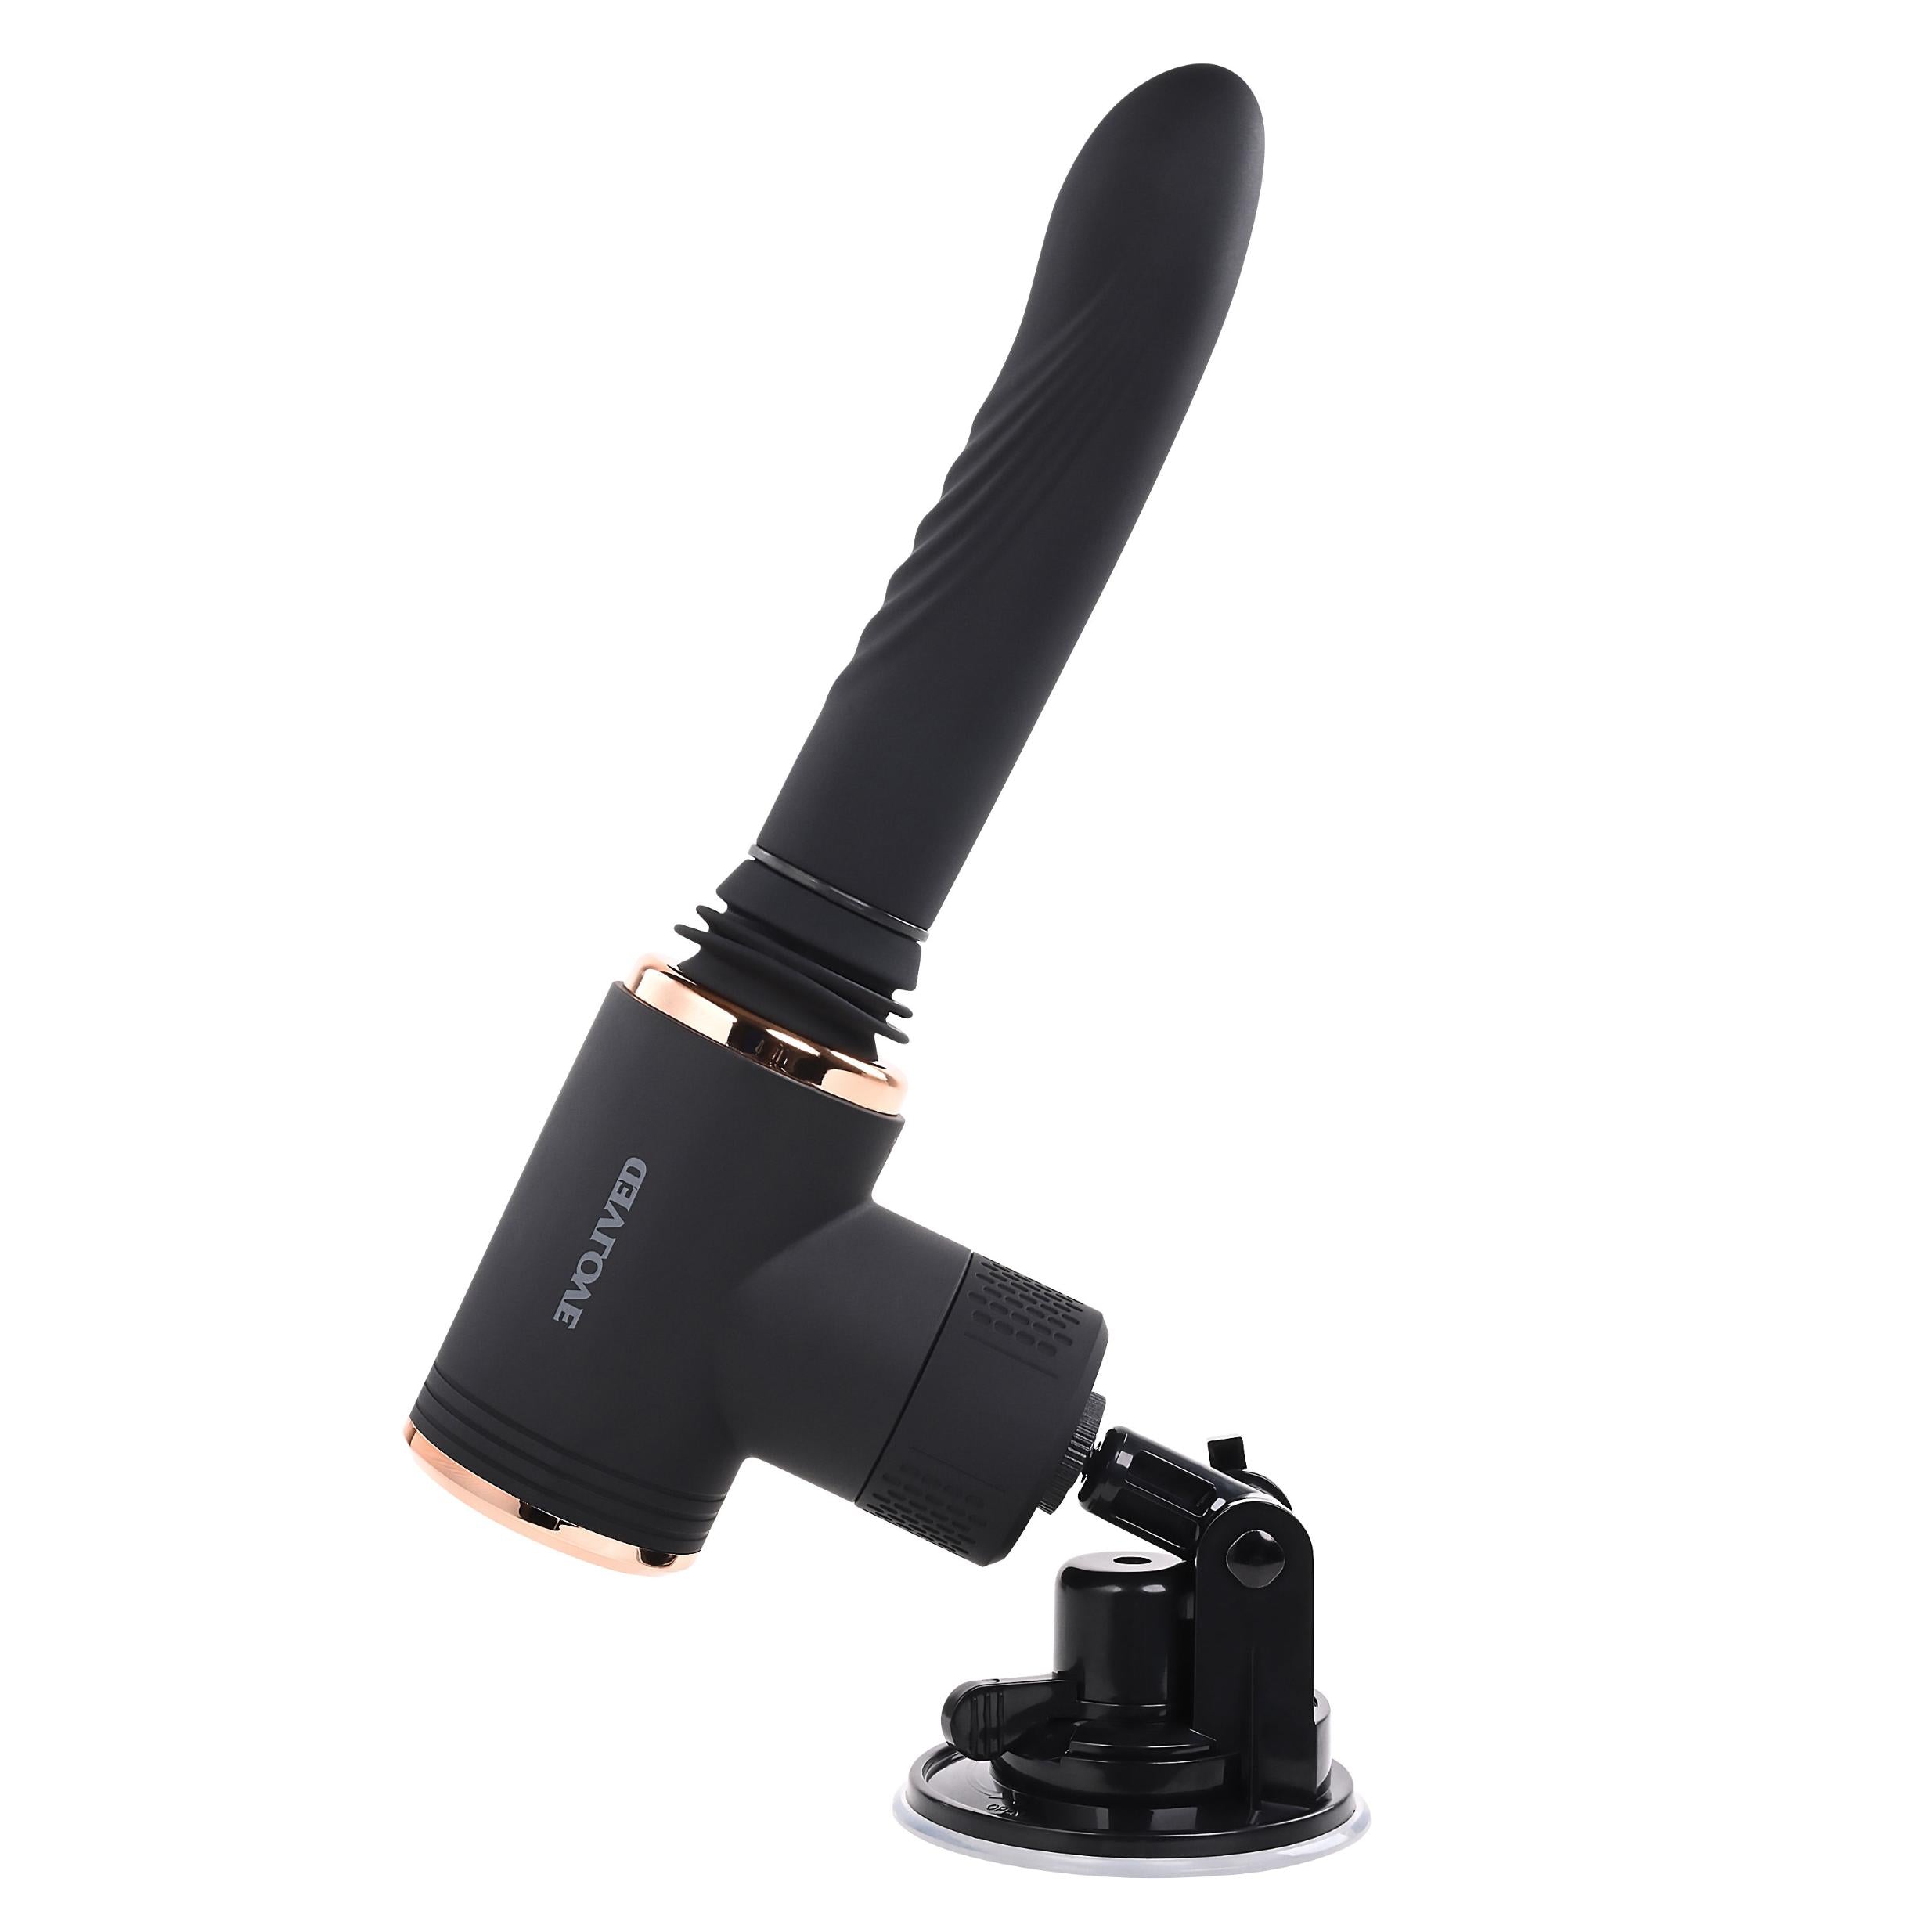 Too Hot to Handle Mountable Thrusting Personal Massager/Vibrator - Black